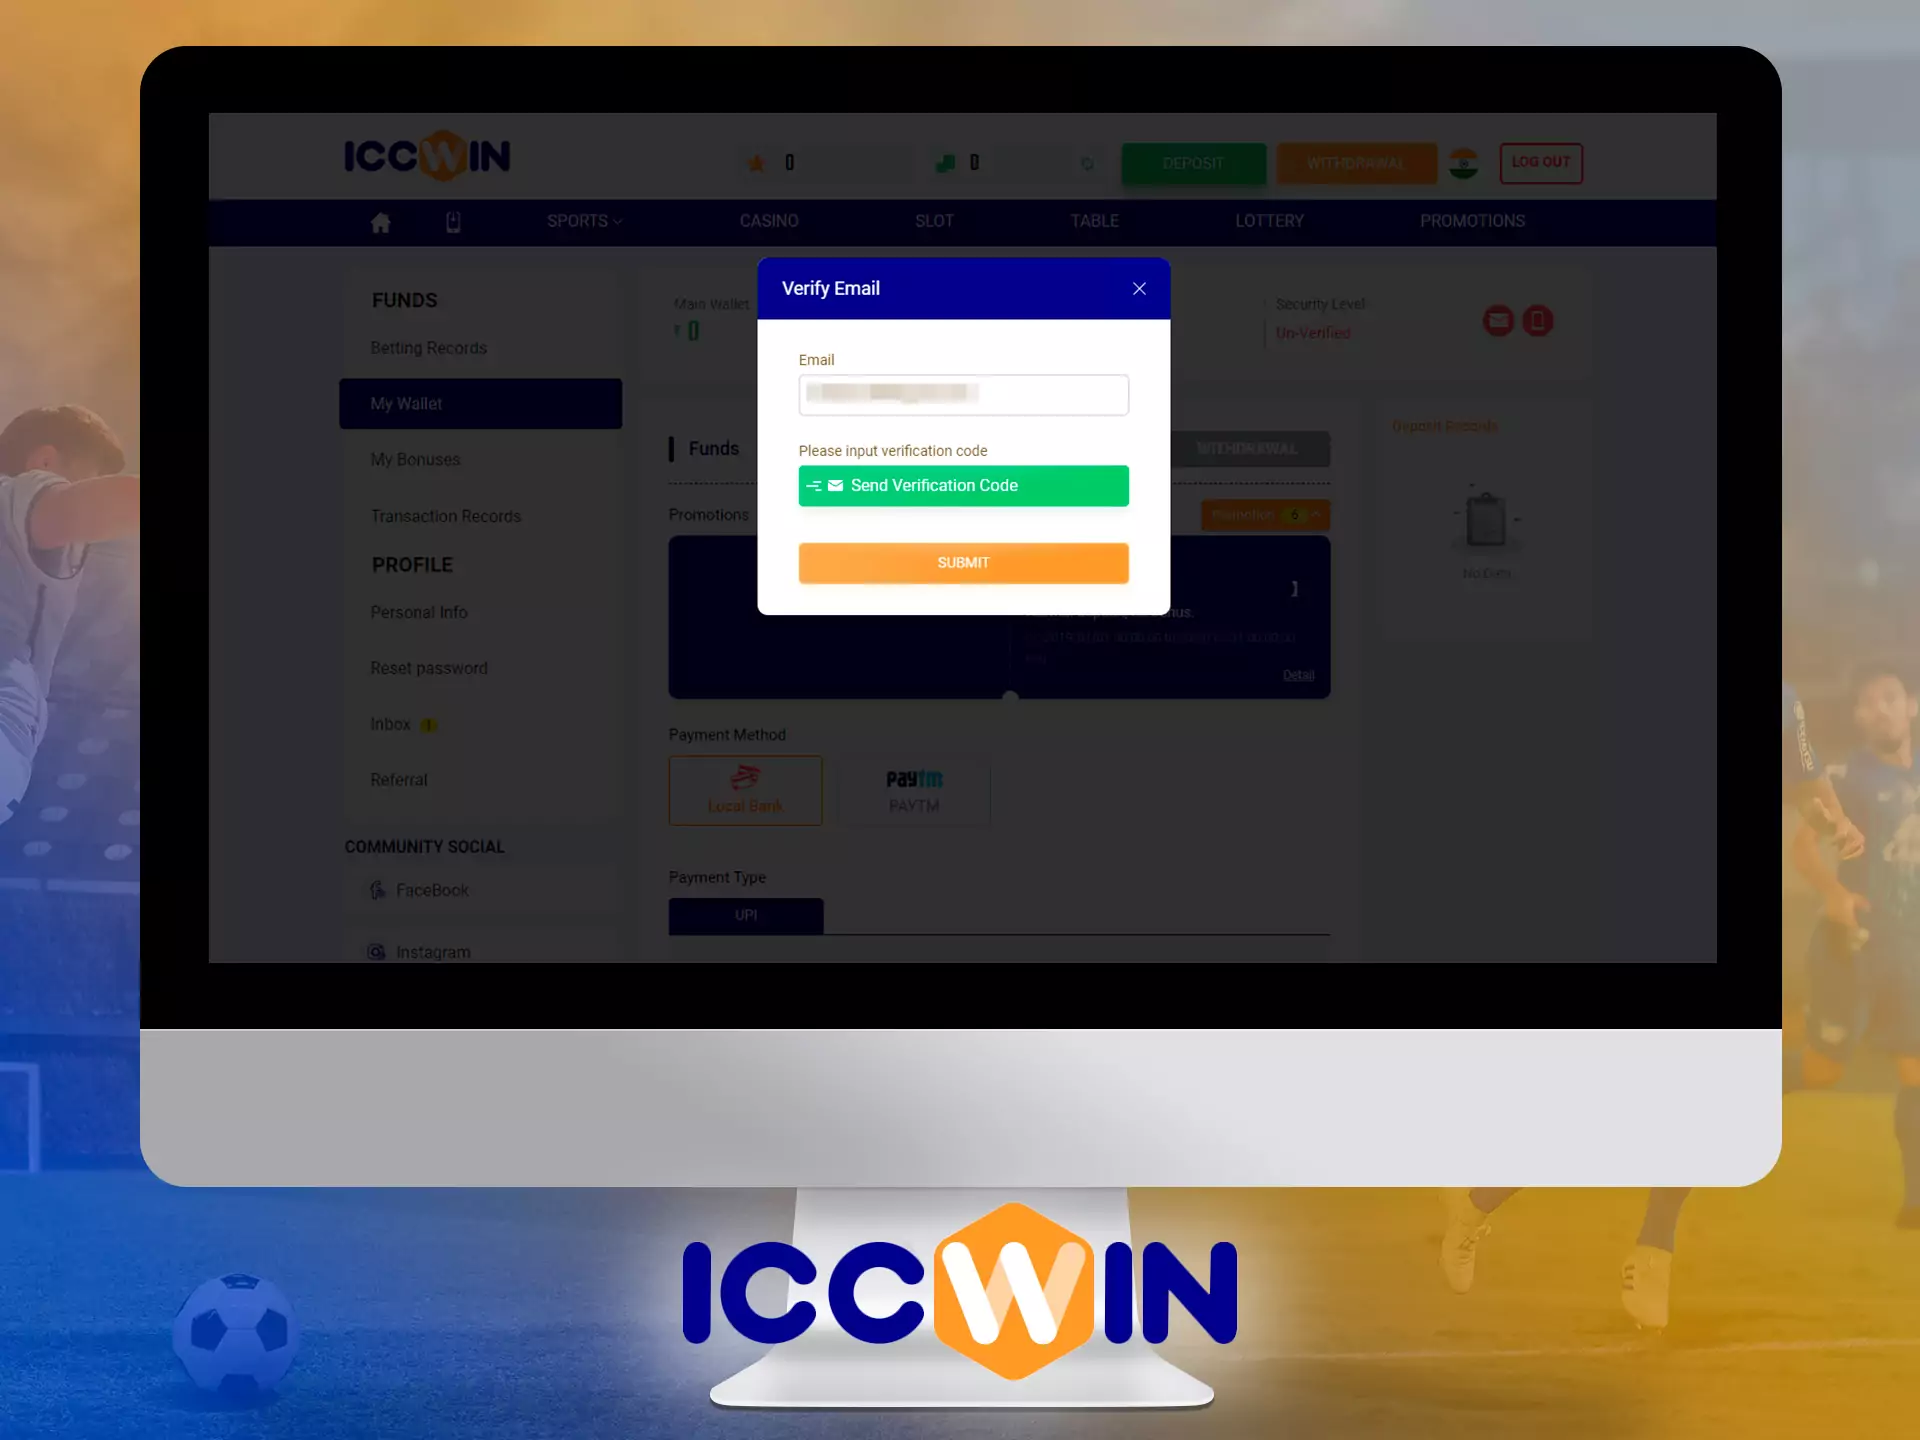 After you created an account, verify it to get access to all the features of the ICCWin site.